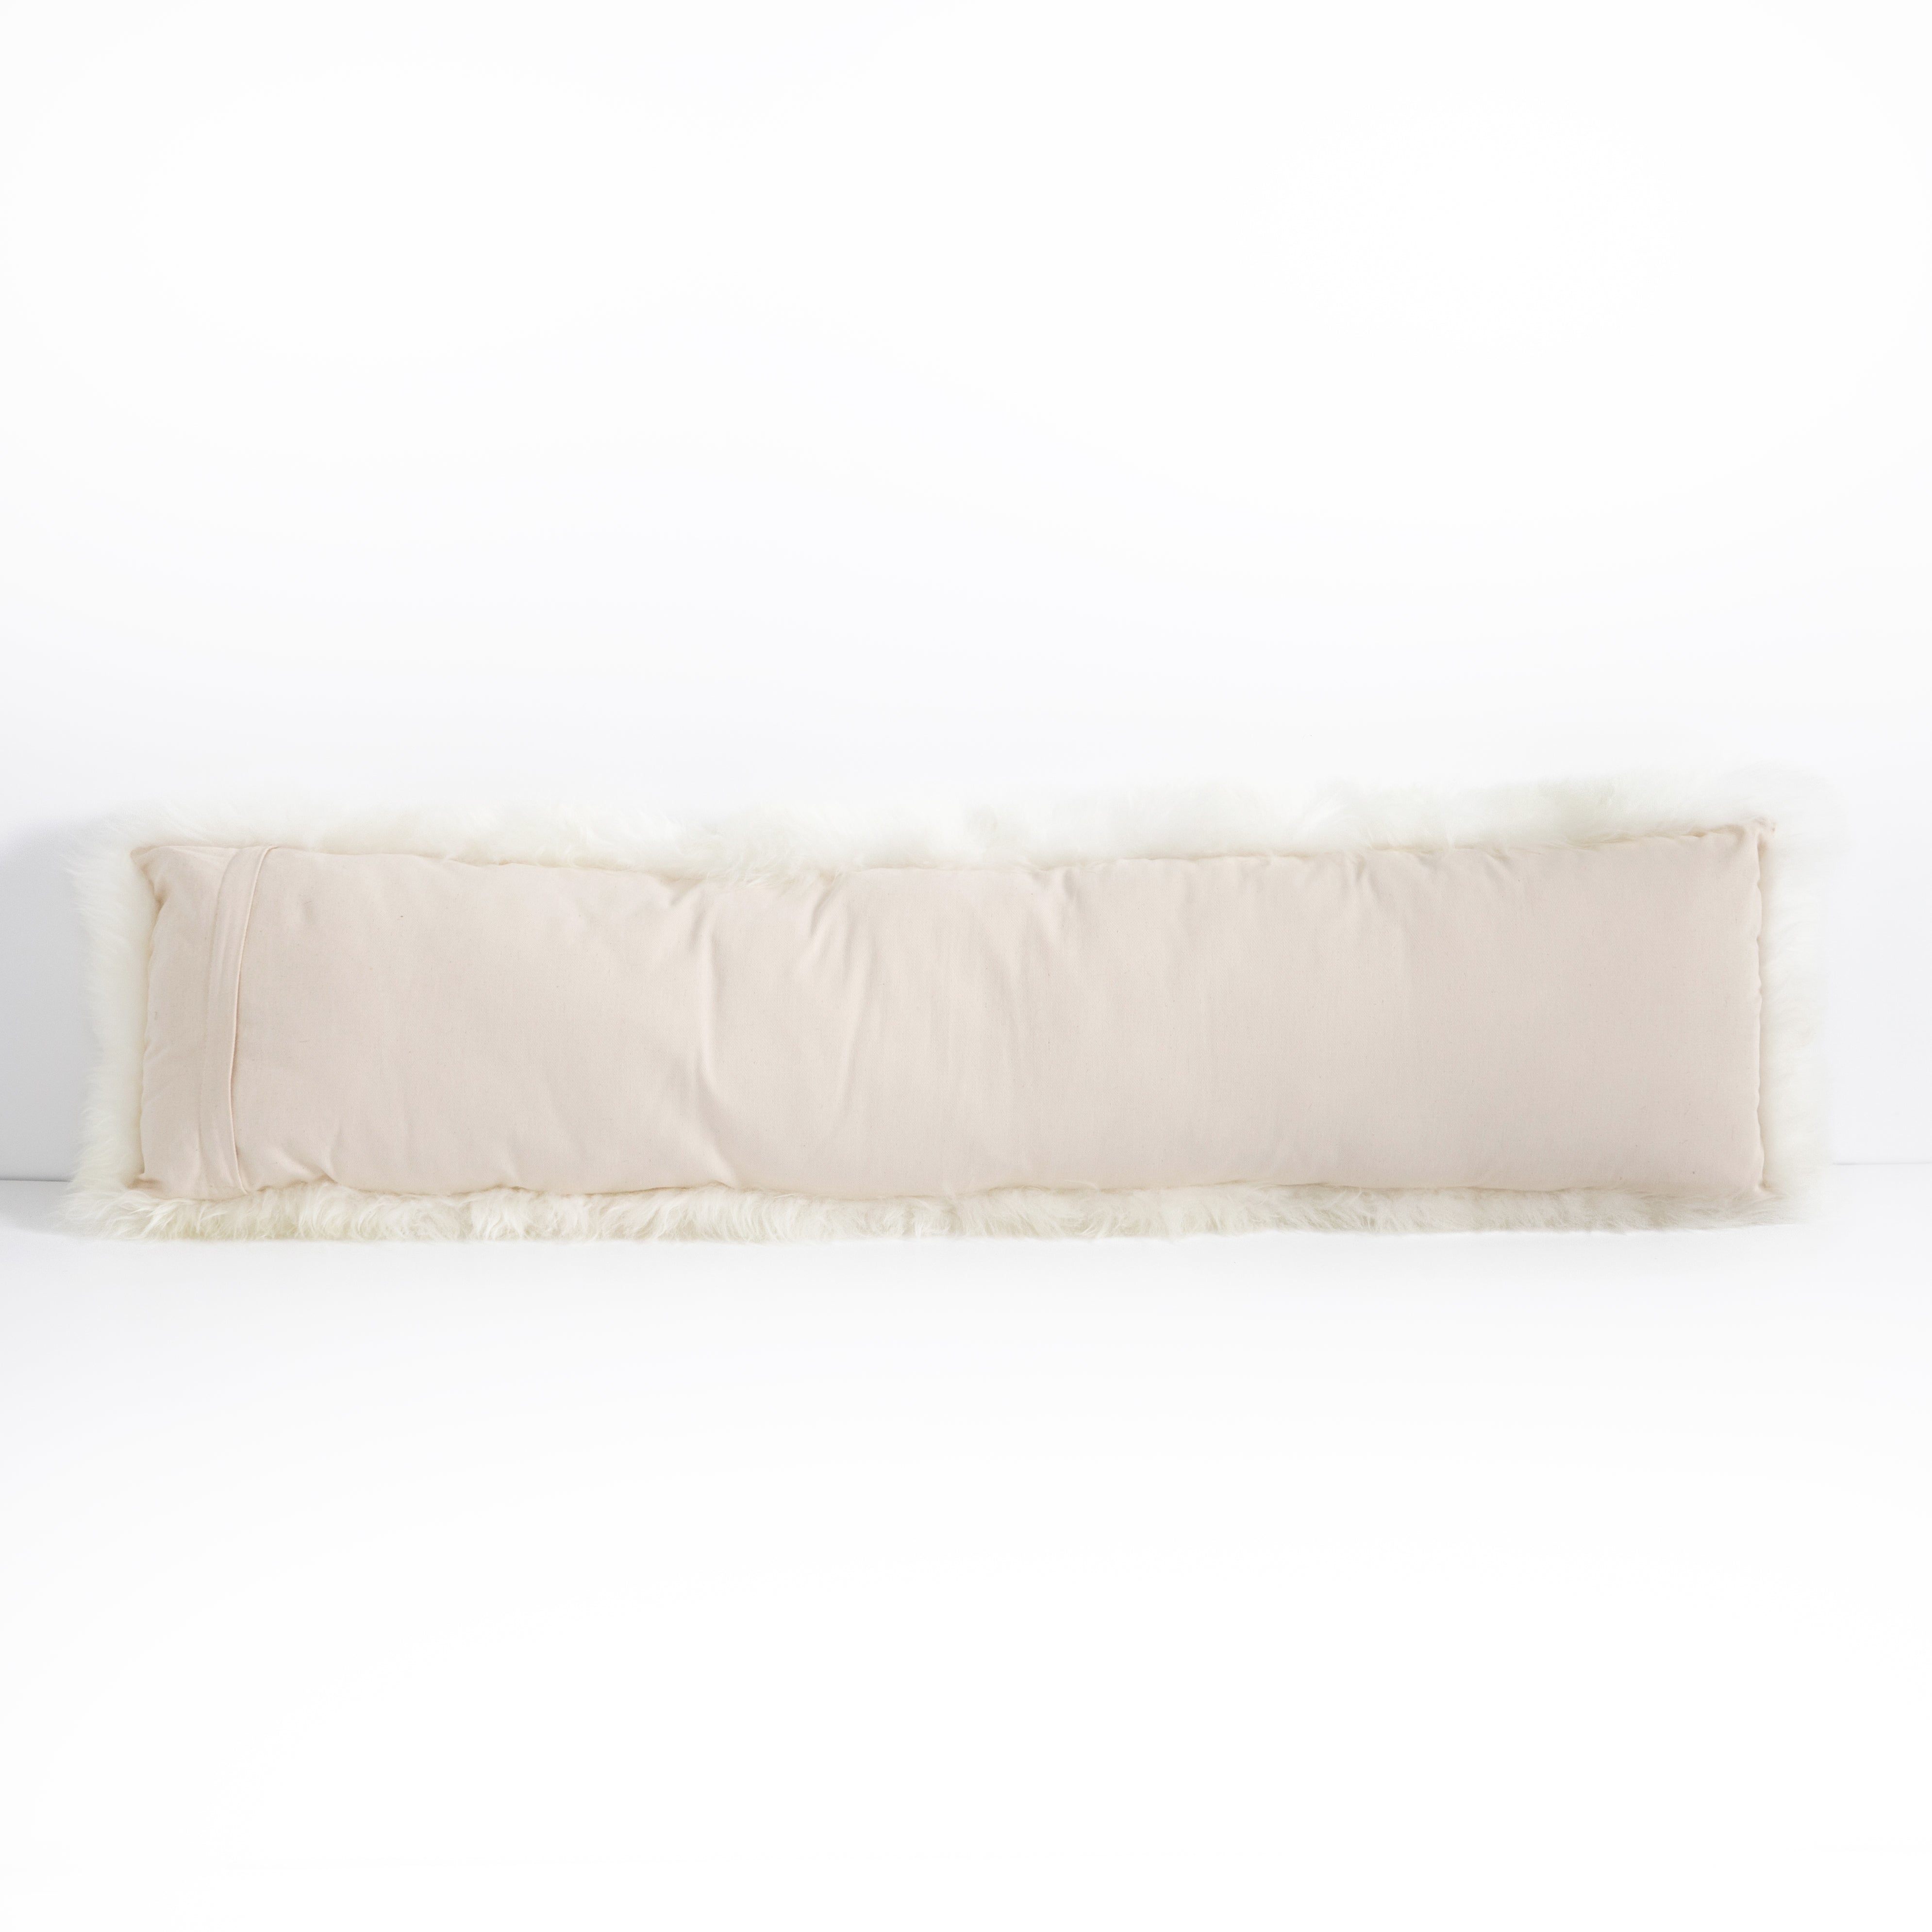 This Lalo Lambskin Lumbar Pillow is made of 100% unshorn sheekskin and brings all the texture to your bedroom or living room sofa.   Overall Dimensions: 48.00"w x 0.50"d x 12.00"h Colors: White Lambskin Materials: 100%Unshornsheepskin